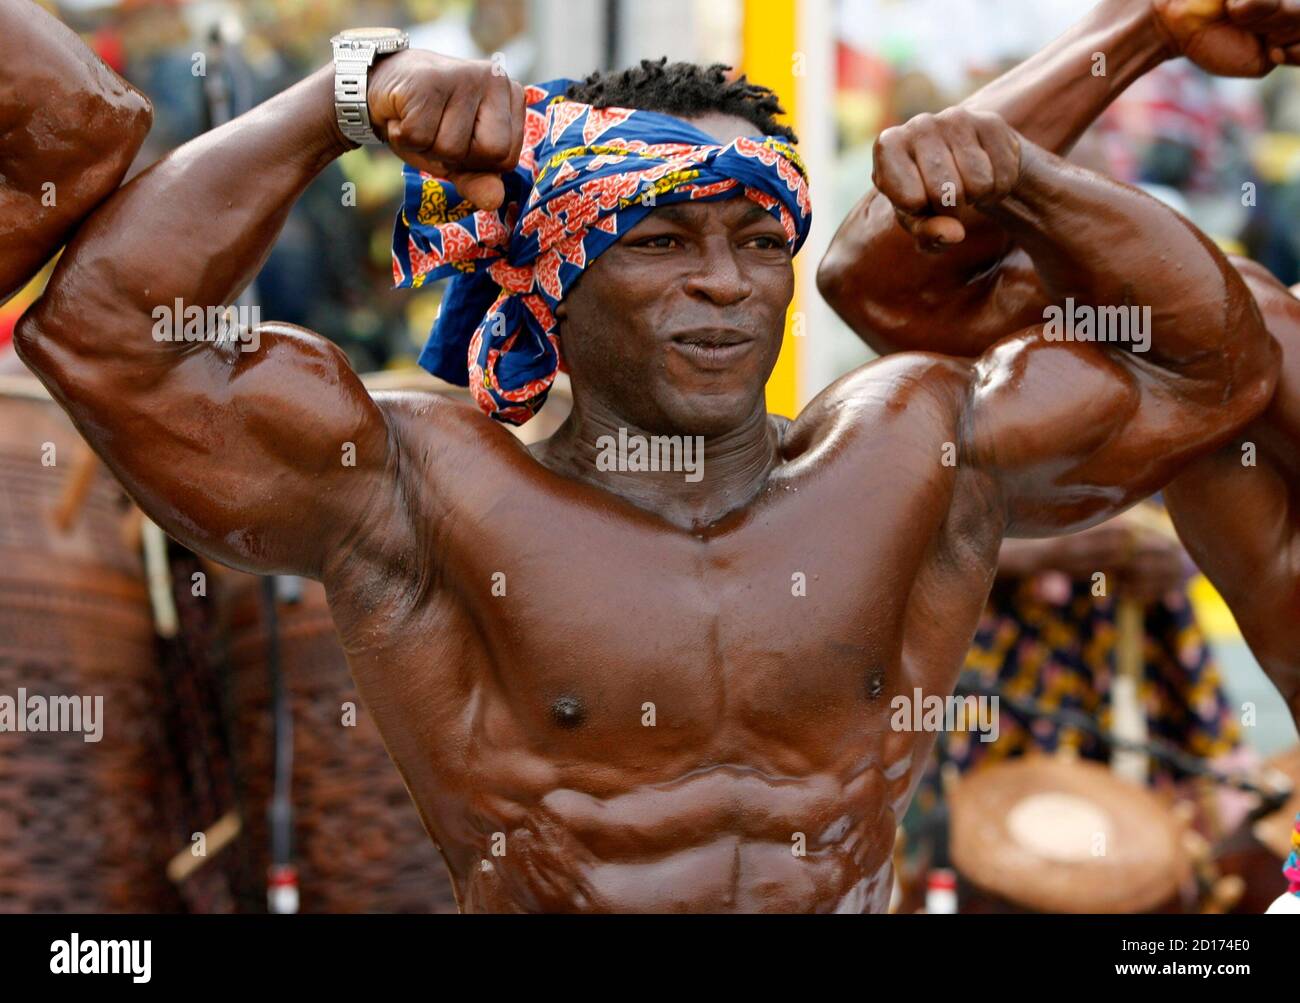 African muscle tumblr